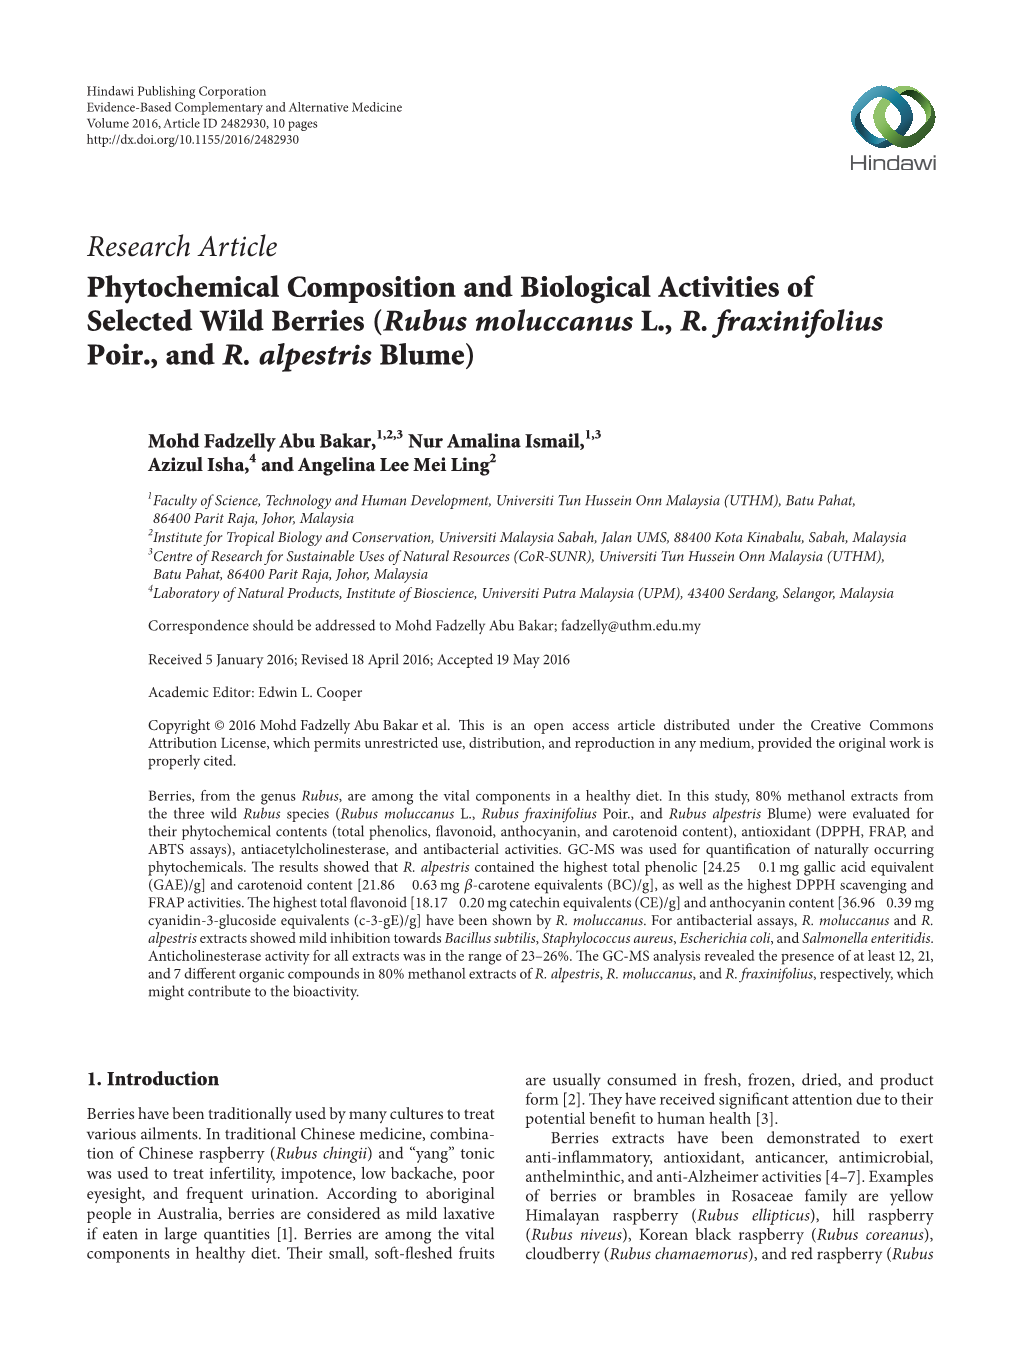 Phytochemical Composition and Biological Activities of Selected Wild Berries (Rubus Moluccanus L., R. Fraxinifolius Poir., and R. Alpestris Blume)